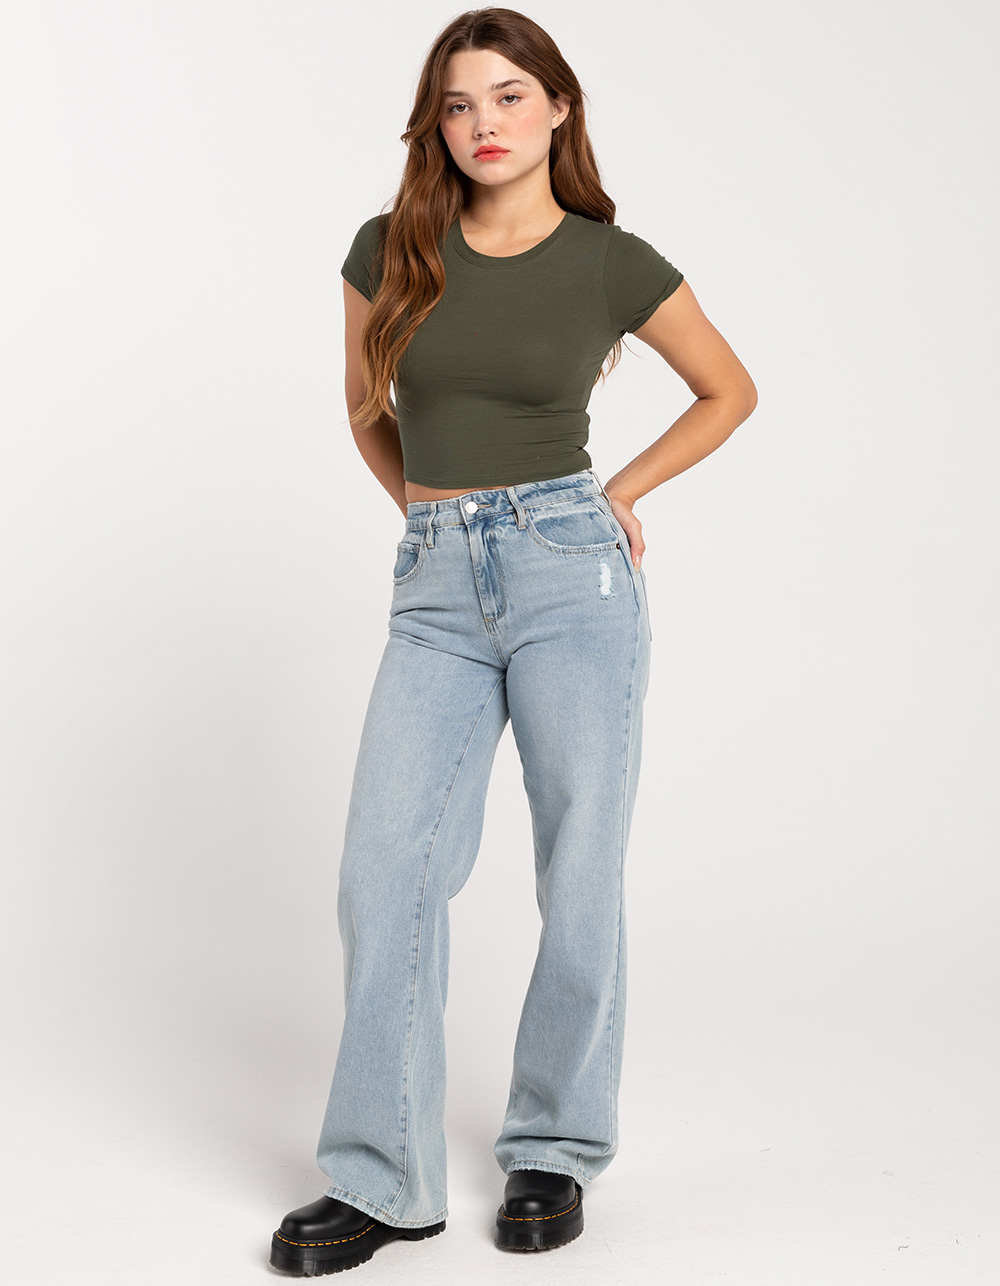 BOZZOLO Womens Cropped Tee - OLIVE | Tillys